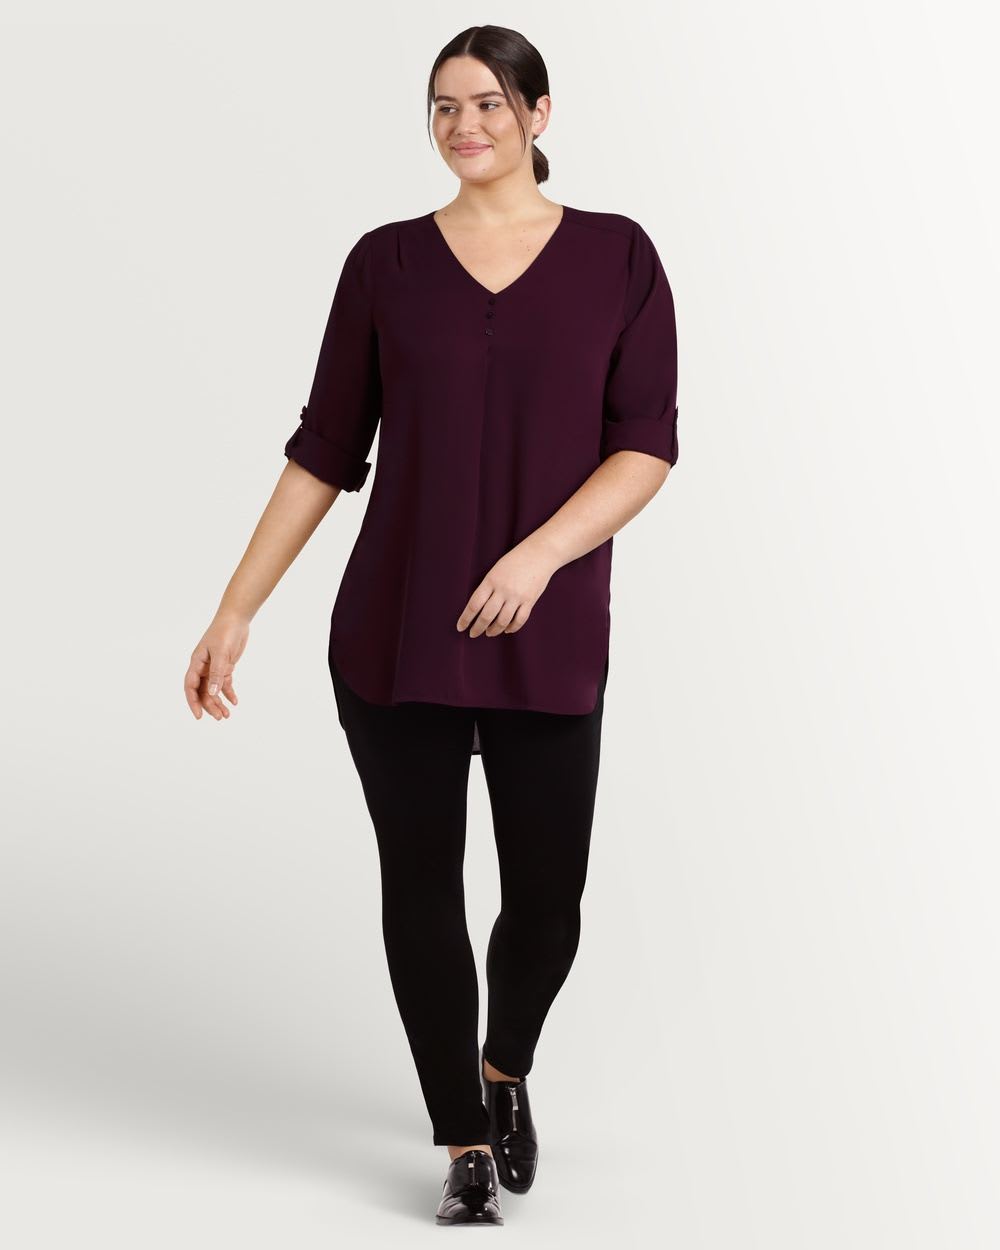 ¾ Sleeve Tunic with Pleat Accents